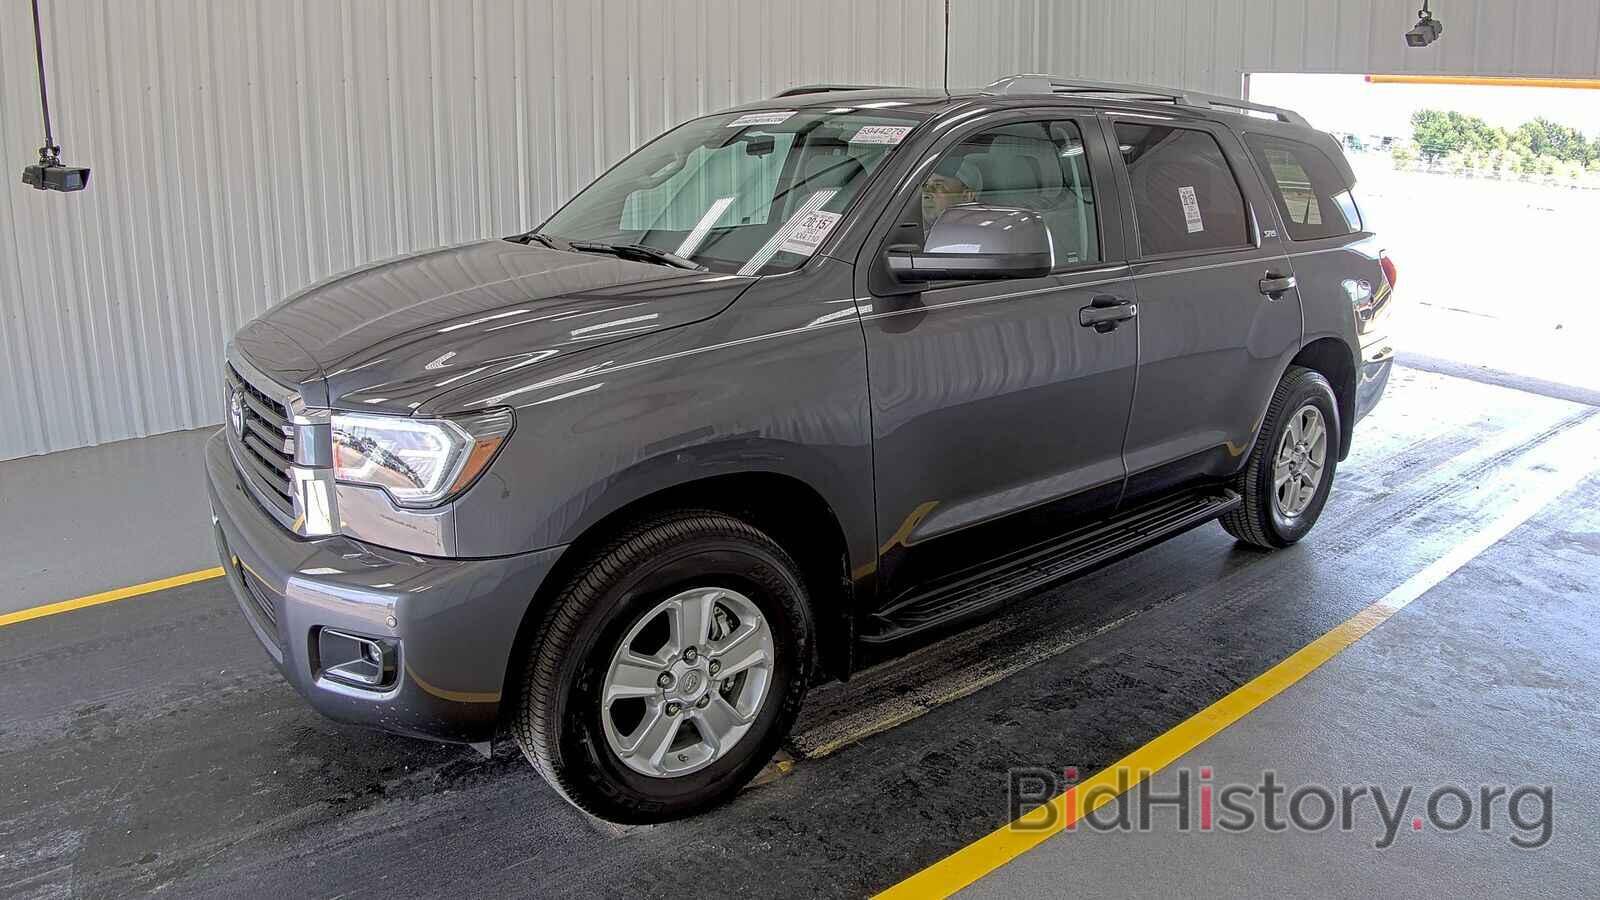 Photo 5TDAY5A11MS075553 - Toyota Sequoia 2021